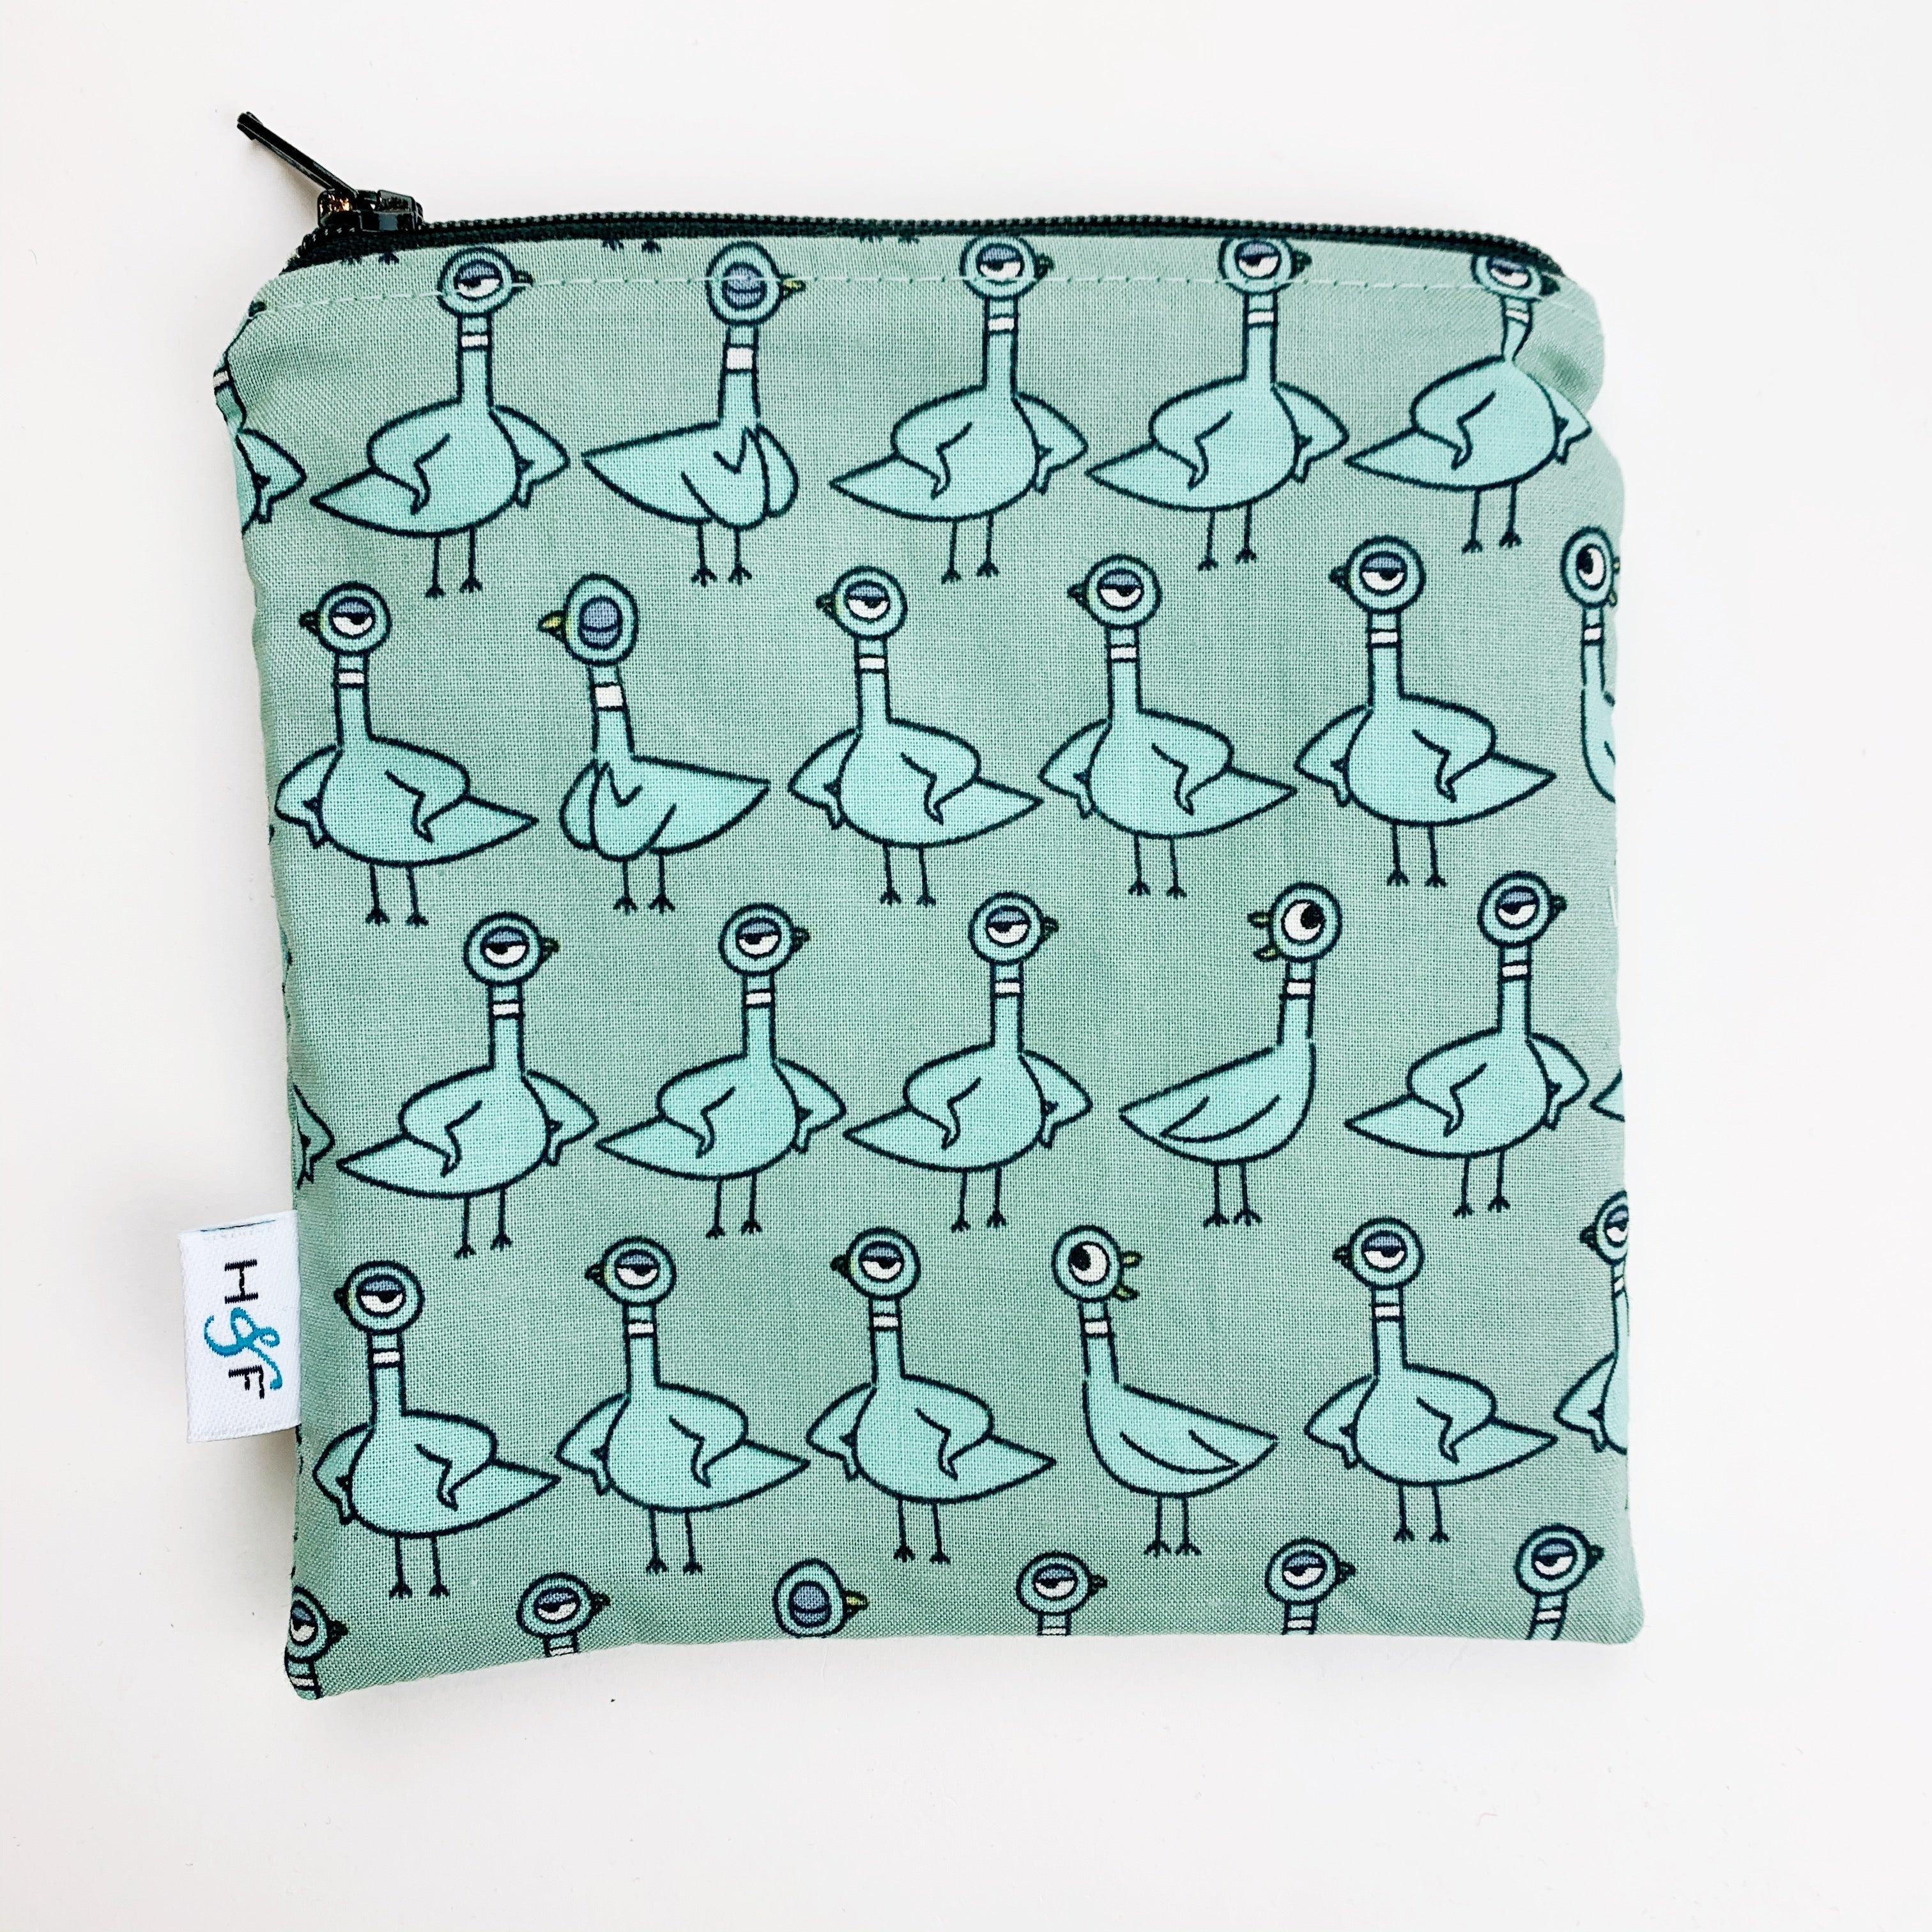 MEDIUM 'square' ReUsable Snack Bag - don't let the pigeon